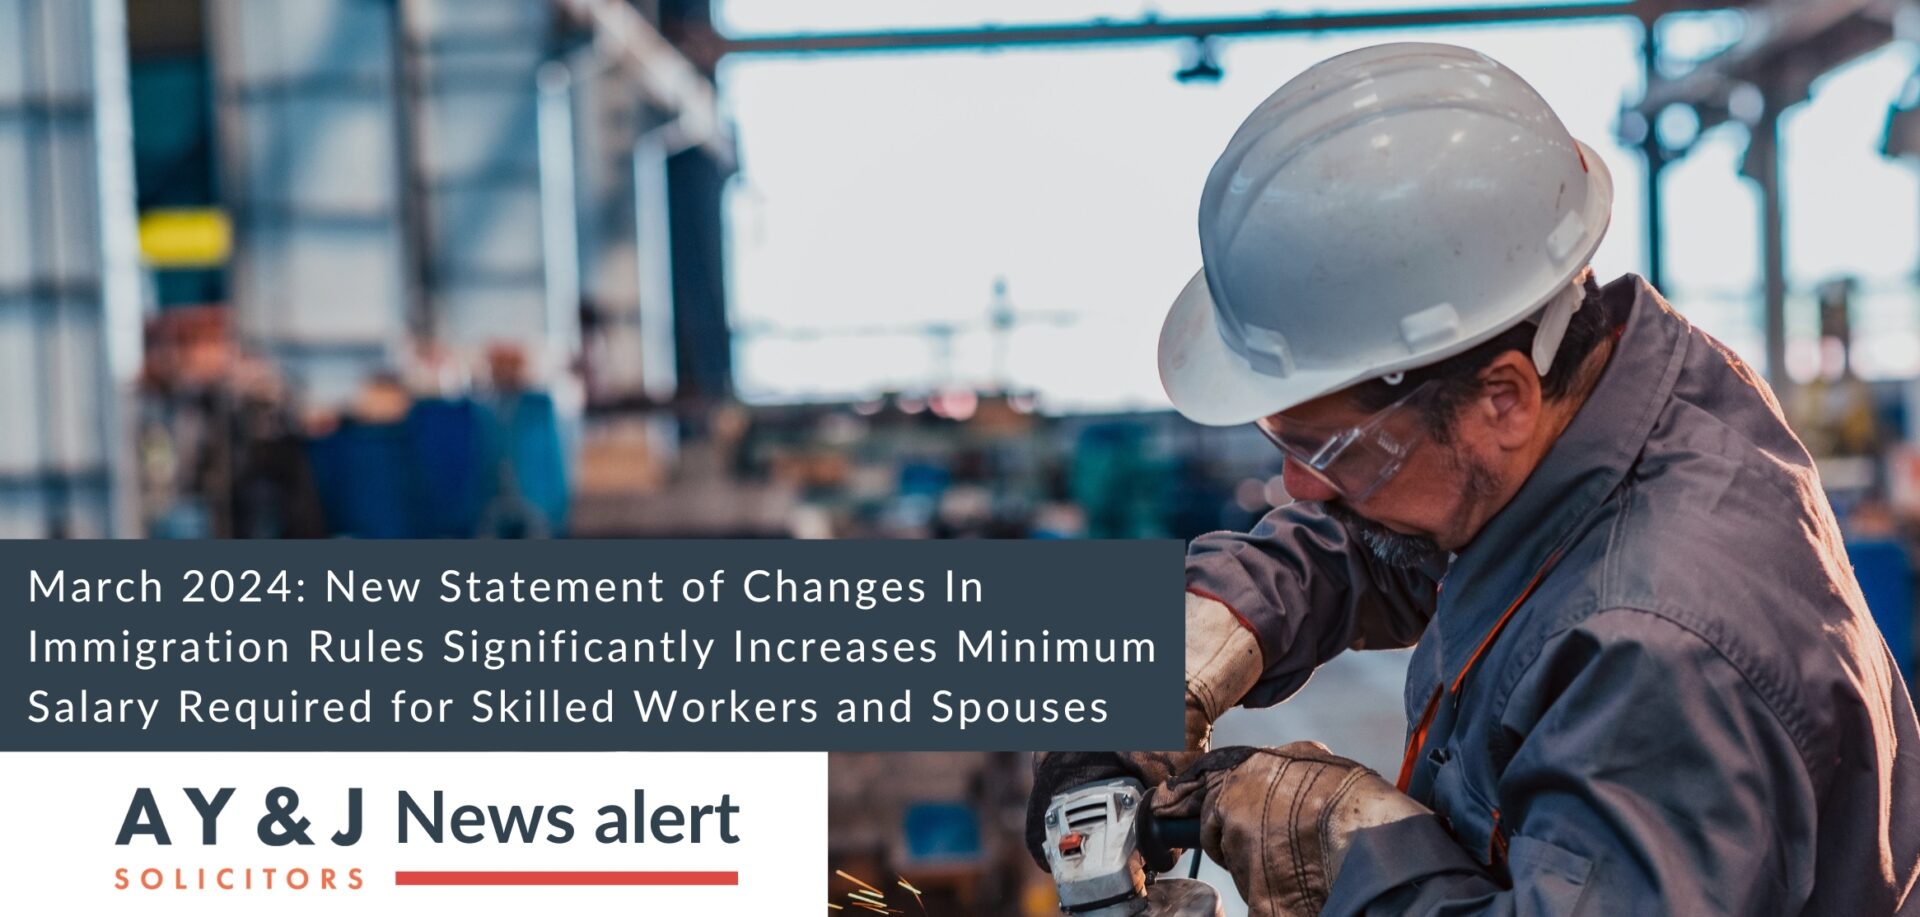 March 2024: New Statement of Changes In Immigration Rules Significantly Increases Minimum Salary Required for Skilled Workers and Spouses